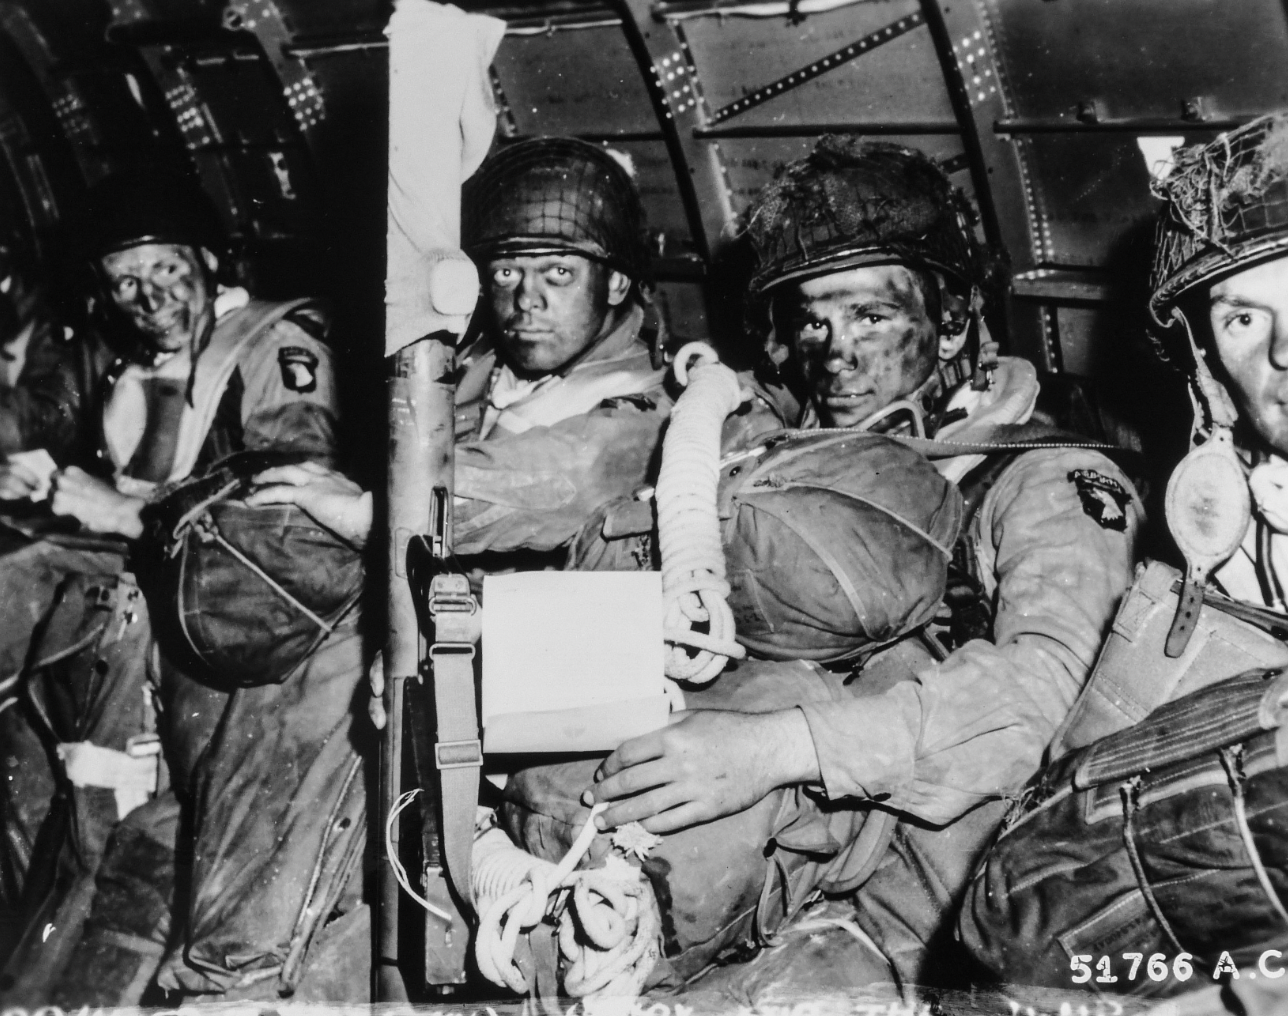 Paratroopers just before they took off for the initial assault of D-Day. Eisenhower's D-Day order in hands of paratrooper in foreground.